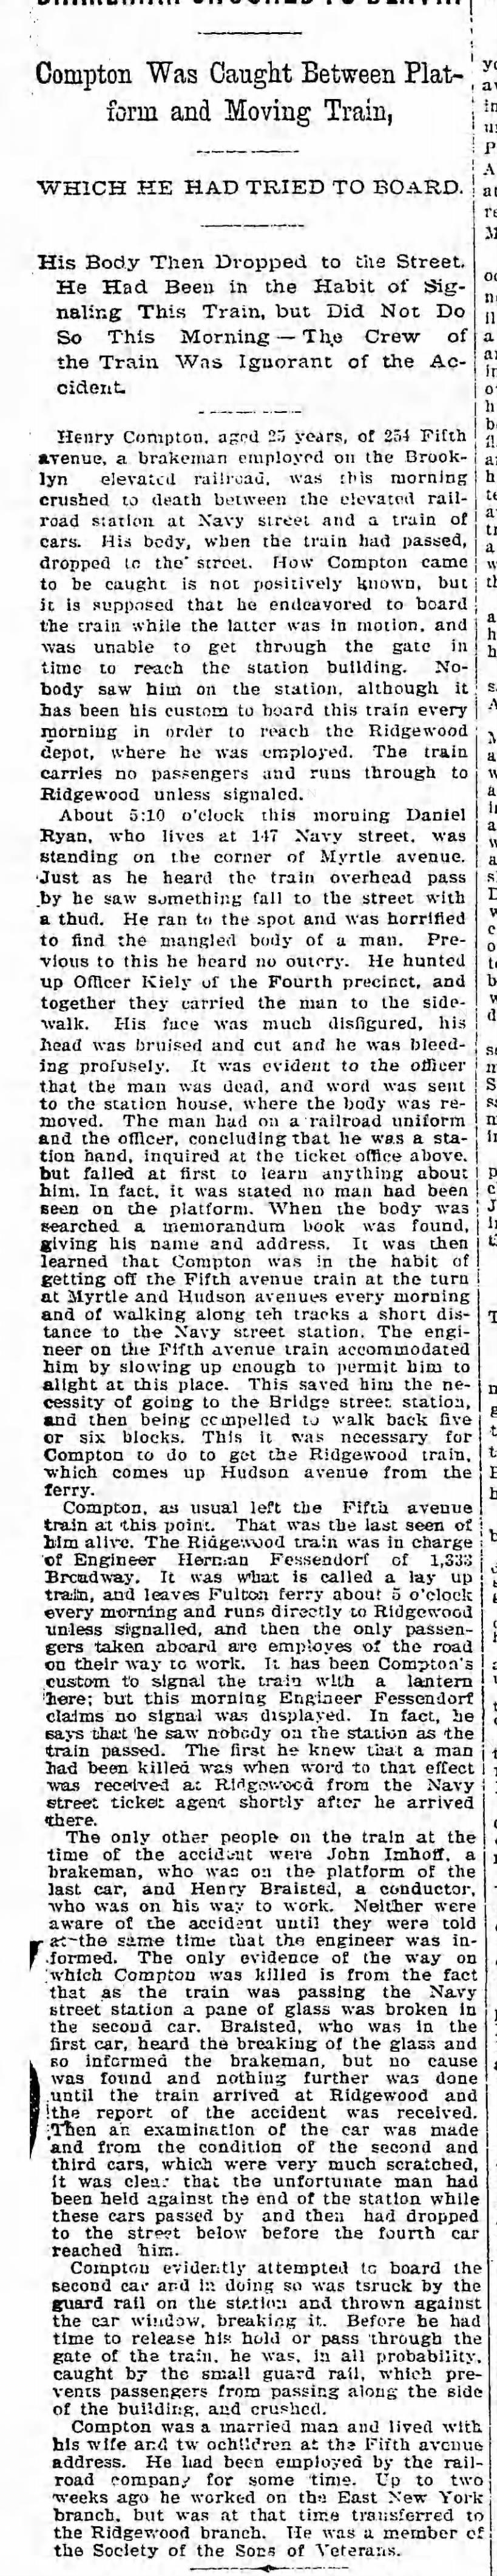 COMPTON Henry  killed by elevated train car
Bklyb Daily Eagle  24 March 1896